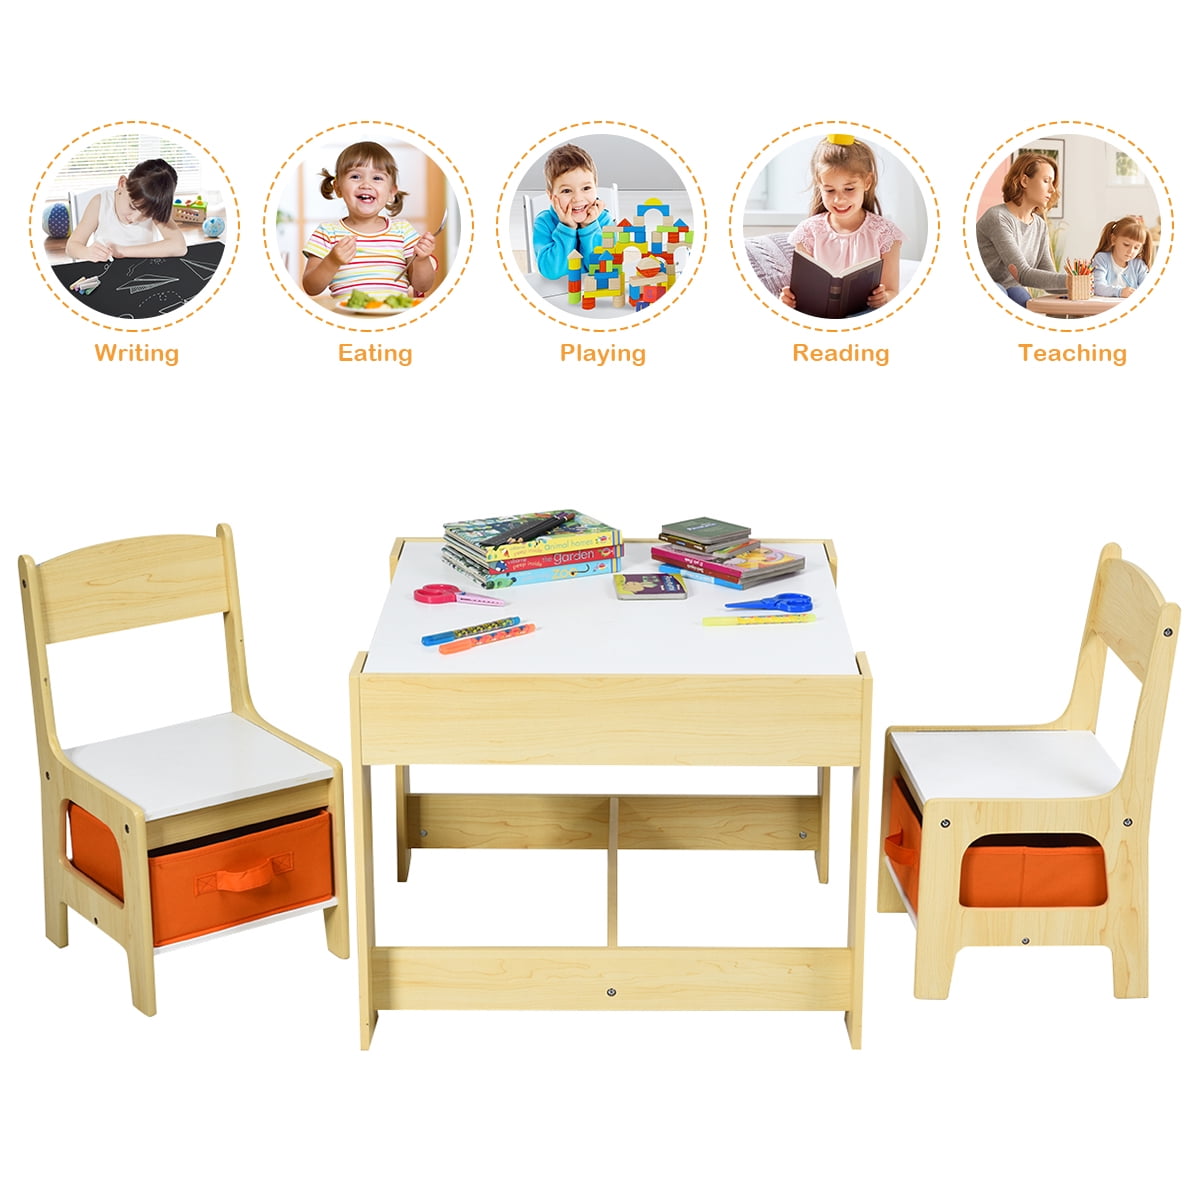 Kids Desk Learning /& Drawing for Kids White Board and Chalk Board Includes chair